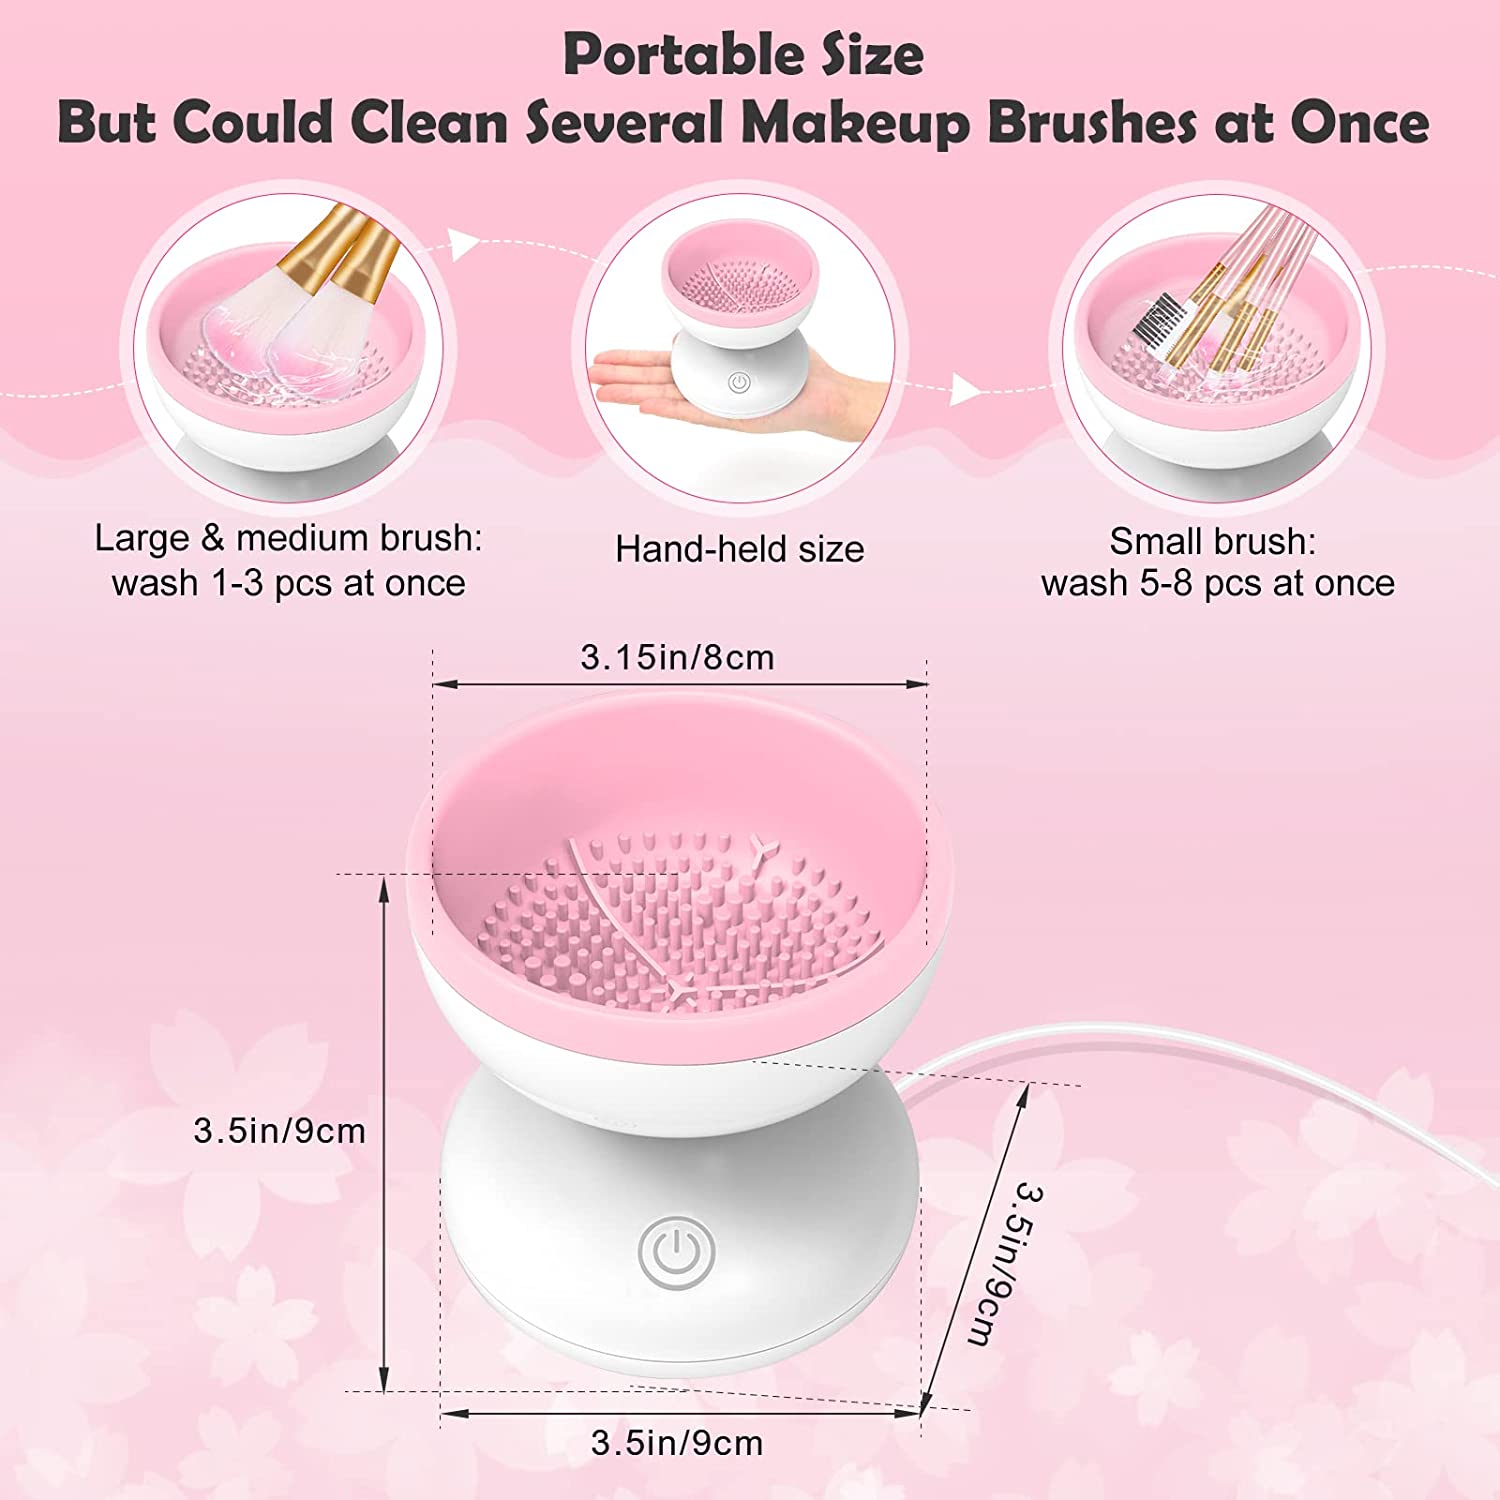  Electric Makeup Brush Cleaner, Abnaok Makeup Brush Cleaner  Machine with Brush Clean Mat, Automatic Cosmetic Brush Cleaner Makeup Brush  Tools for All Size Beauty Makeup Brushes Set, Gift for Women Wife 